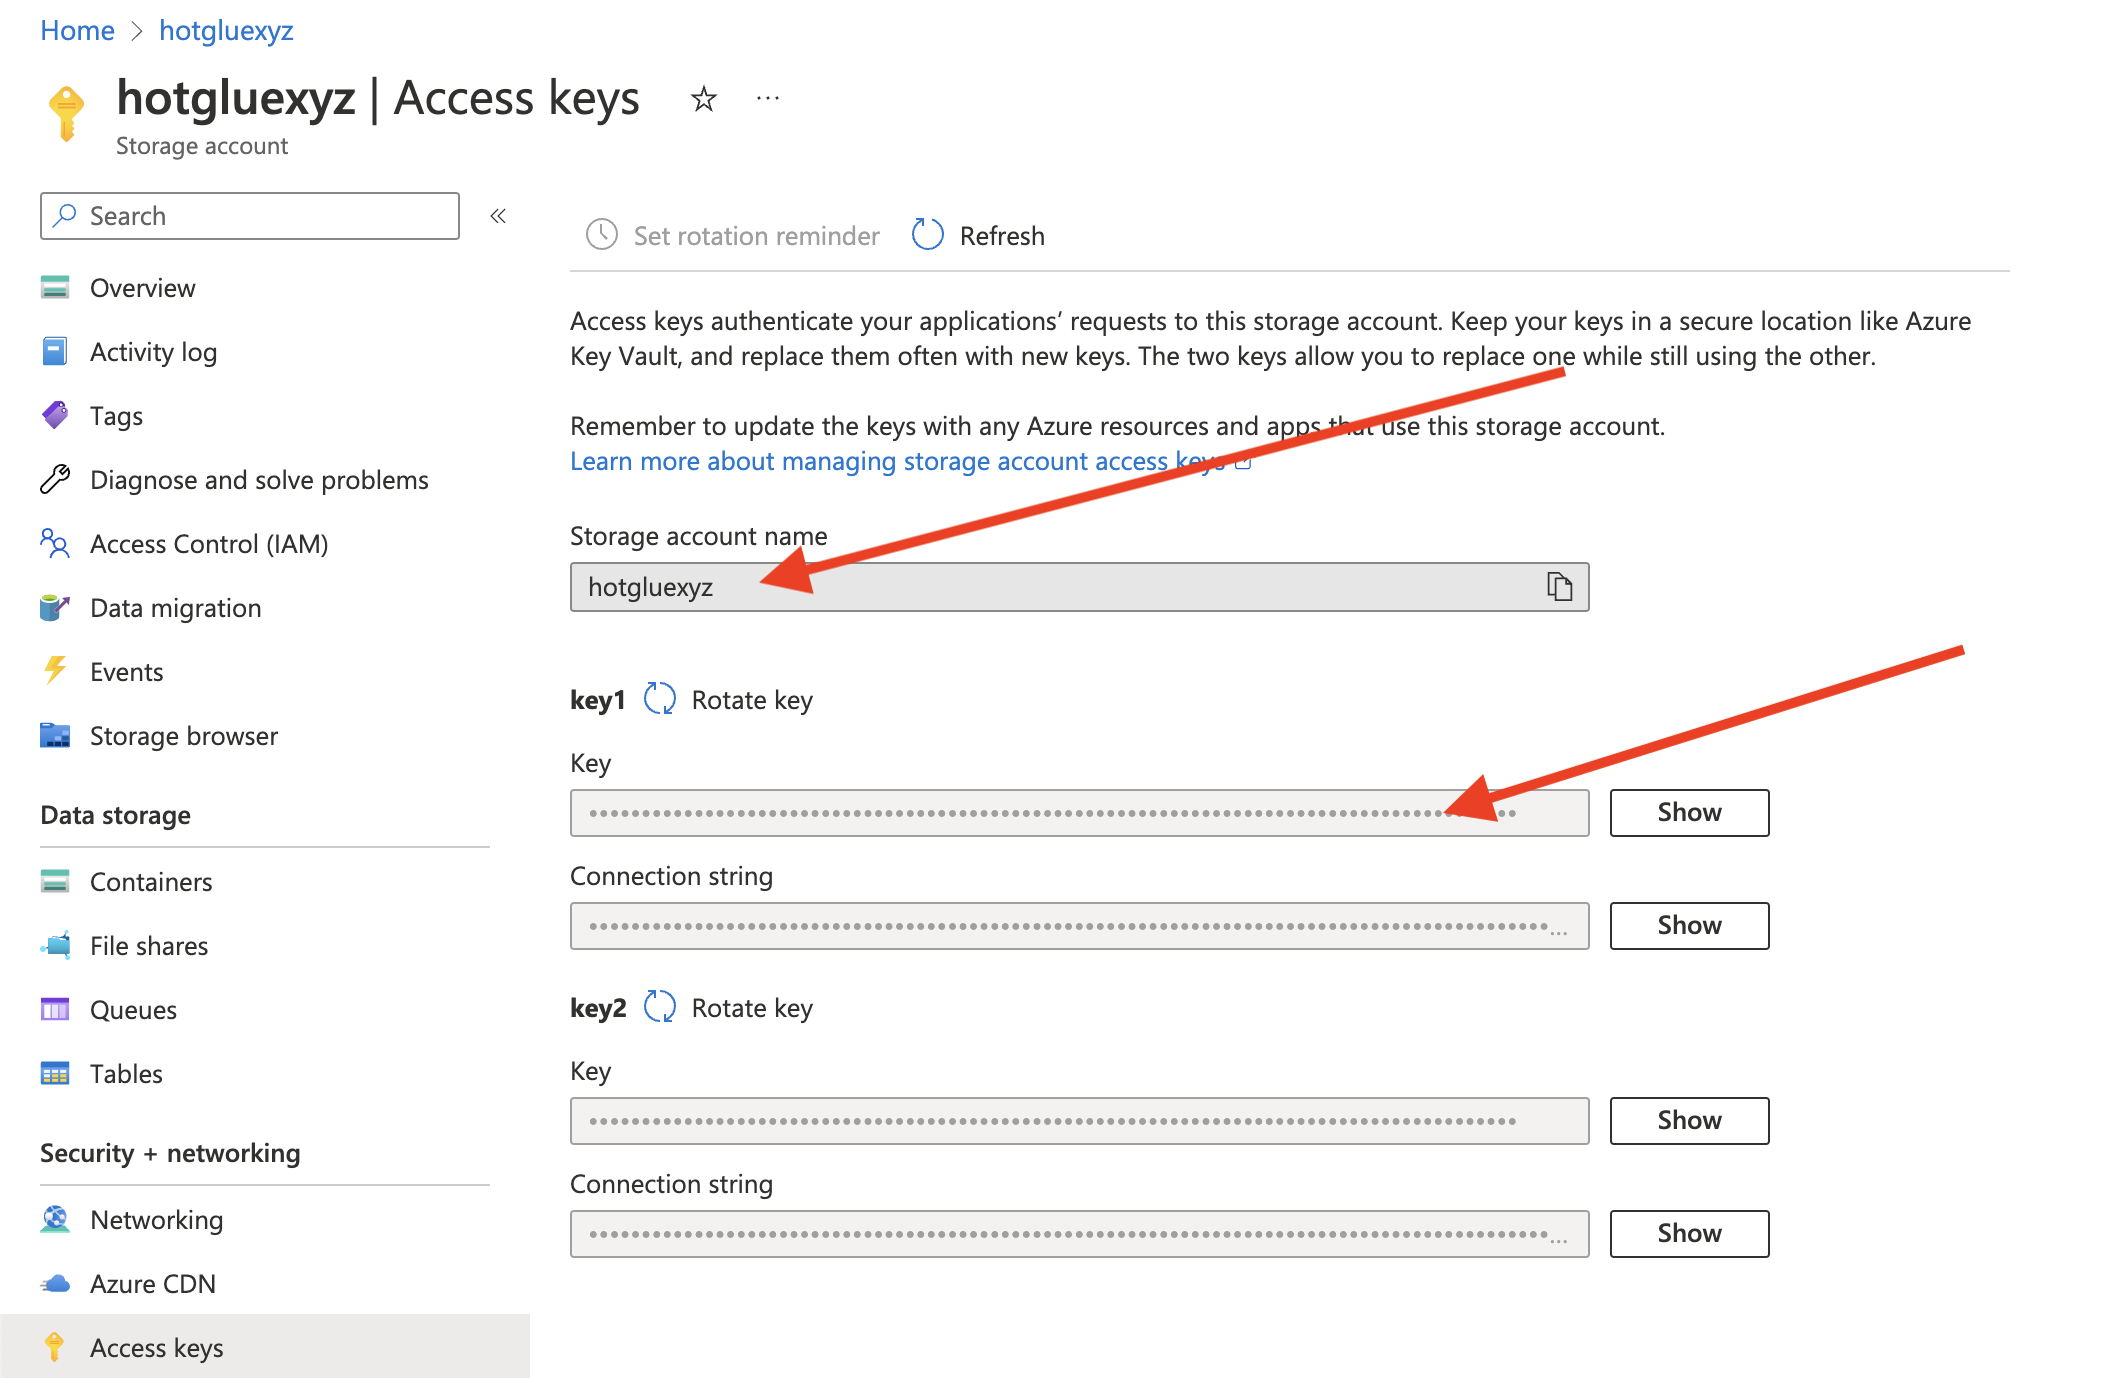 Get Storage Account Name and Key